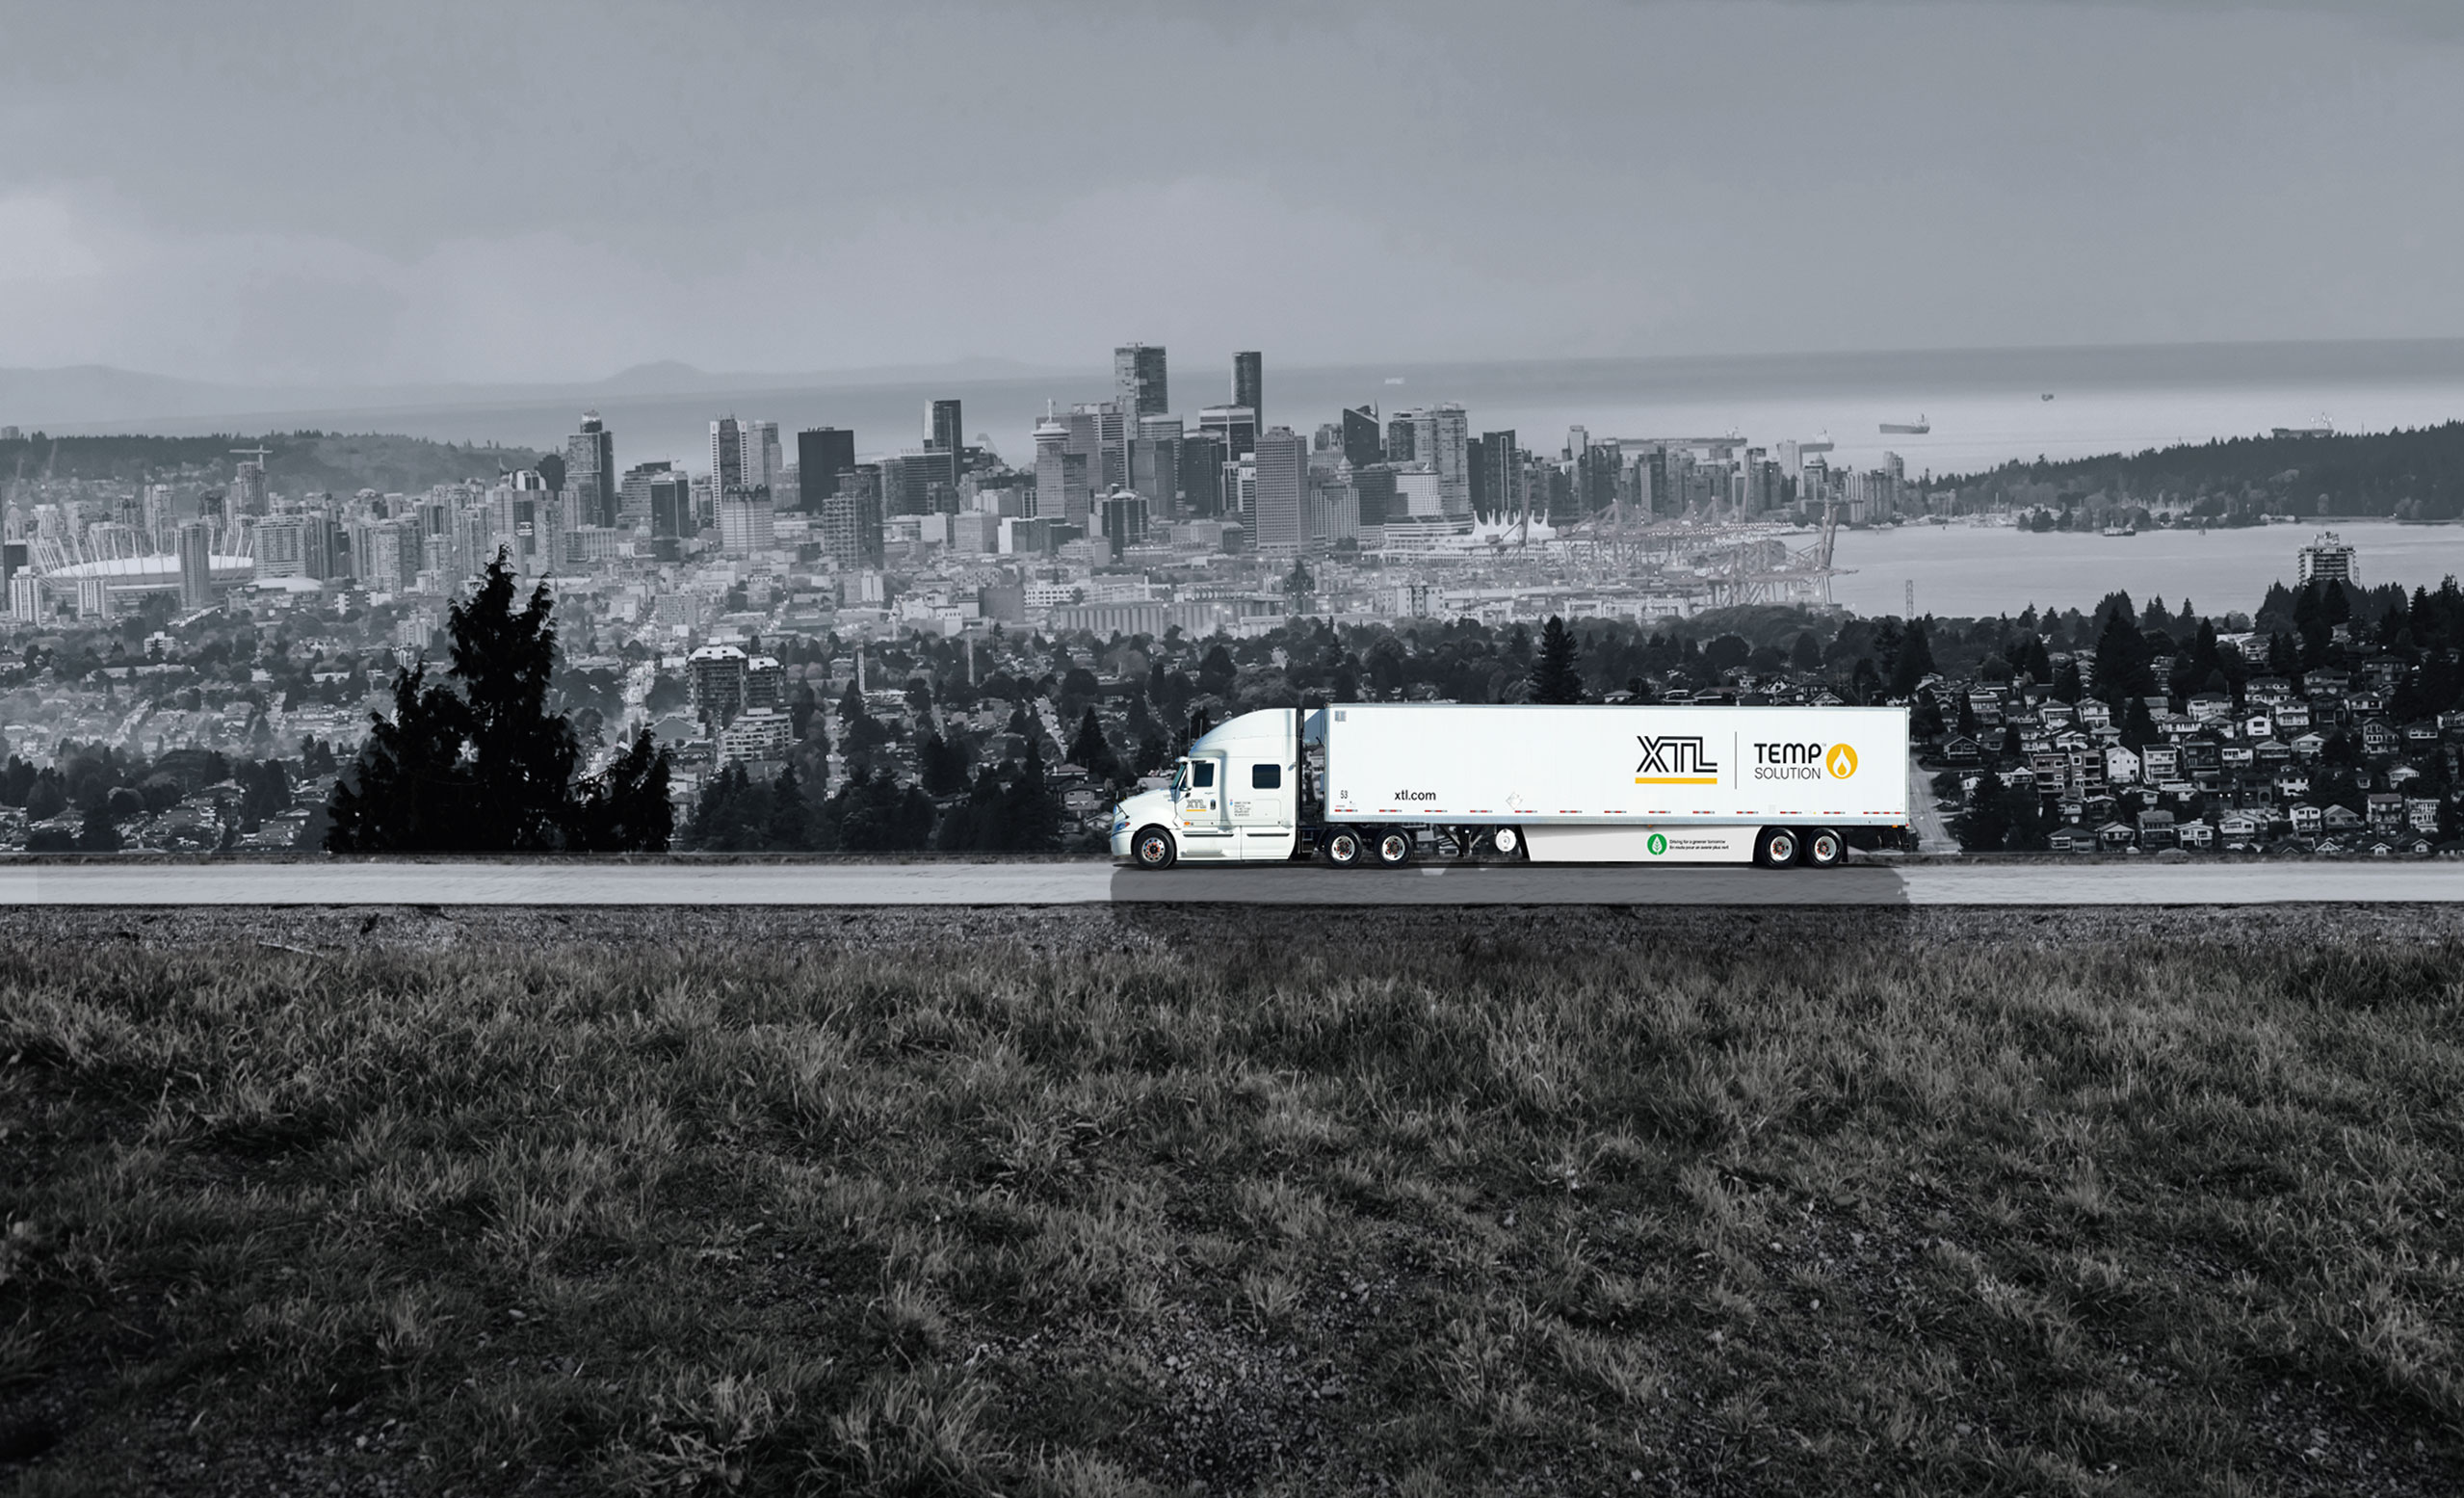 XTL transport truck and trailer driving on road, with city of Vancouver in the background